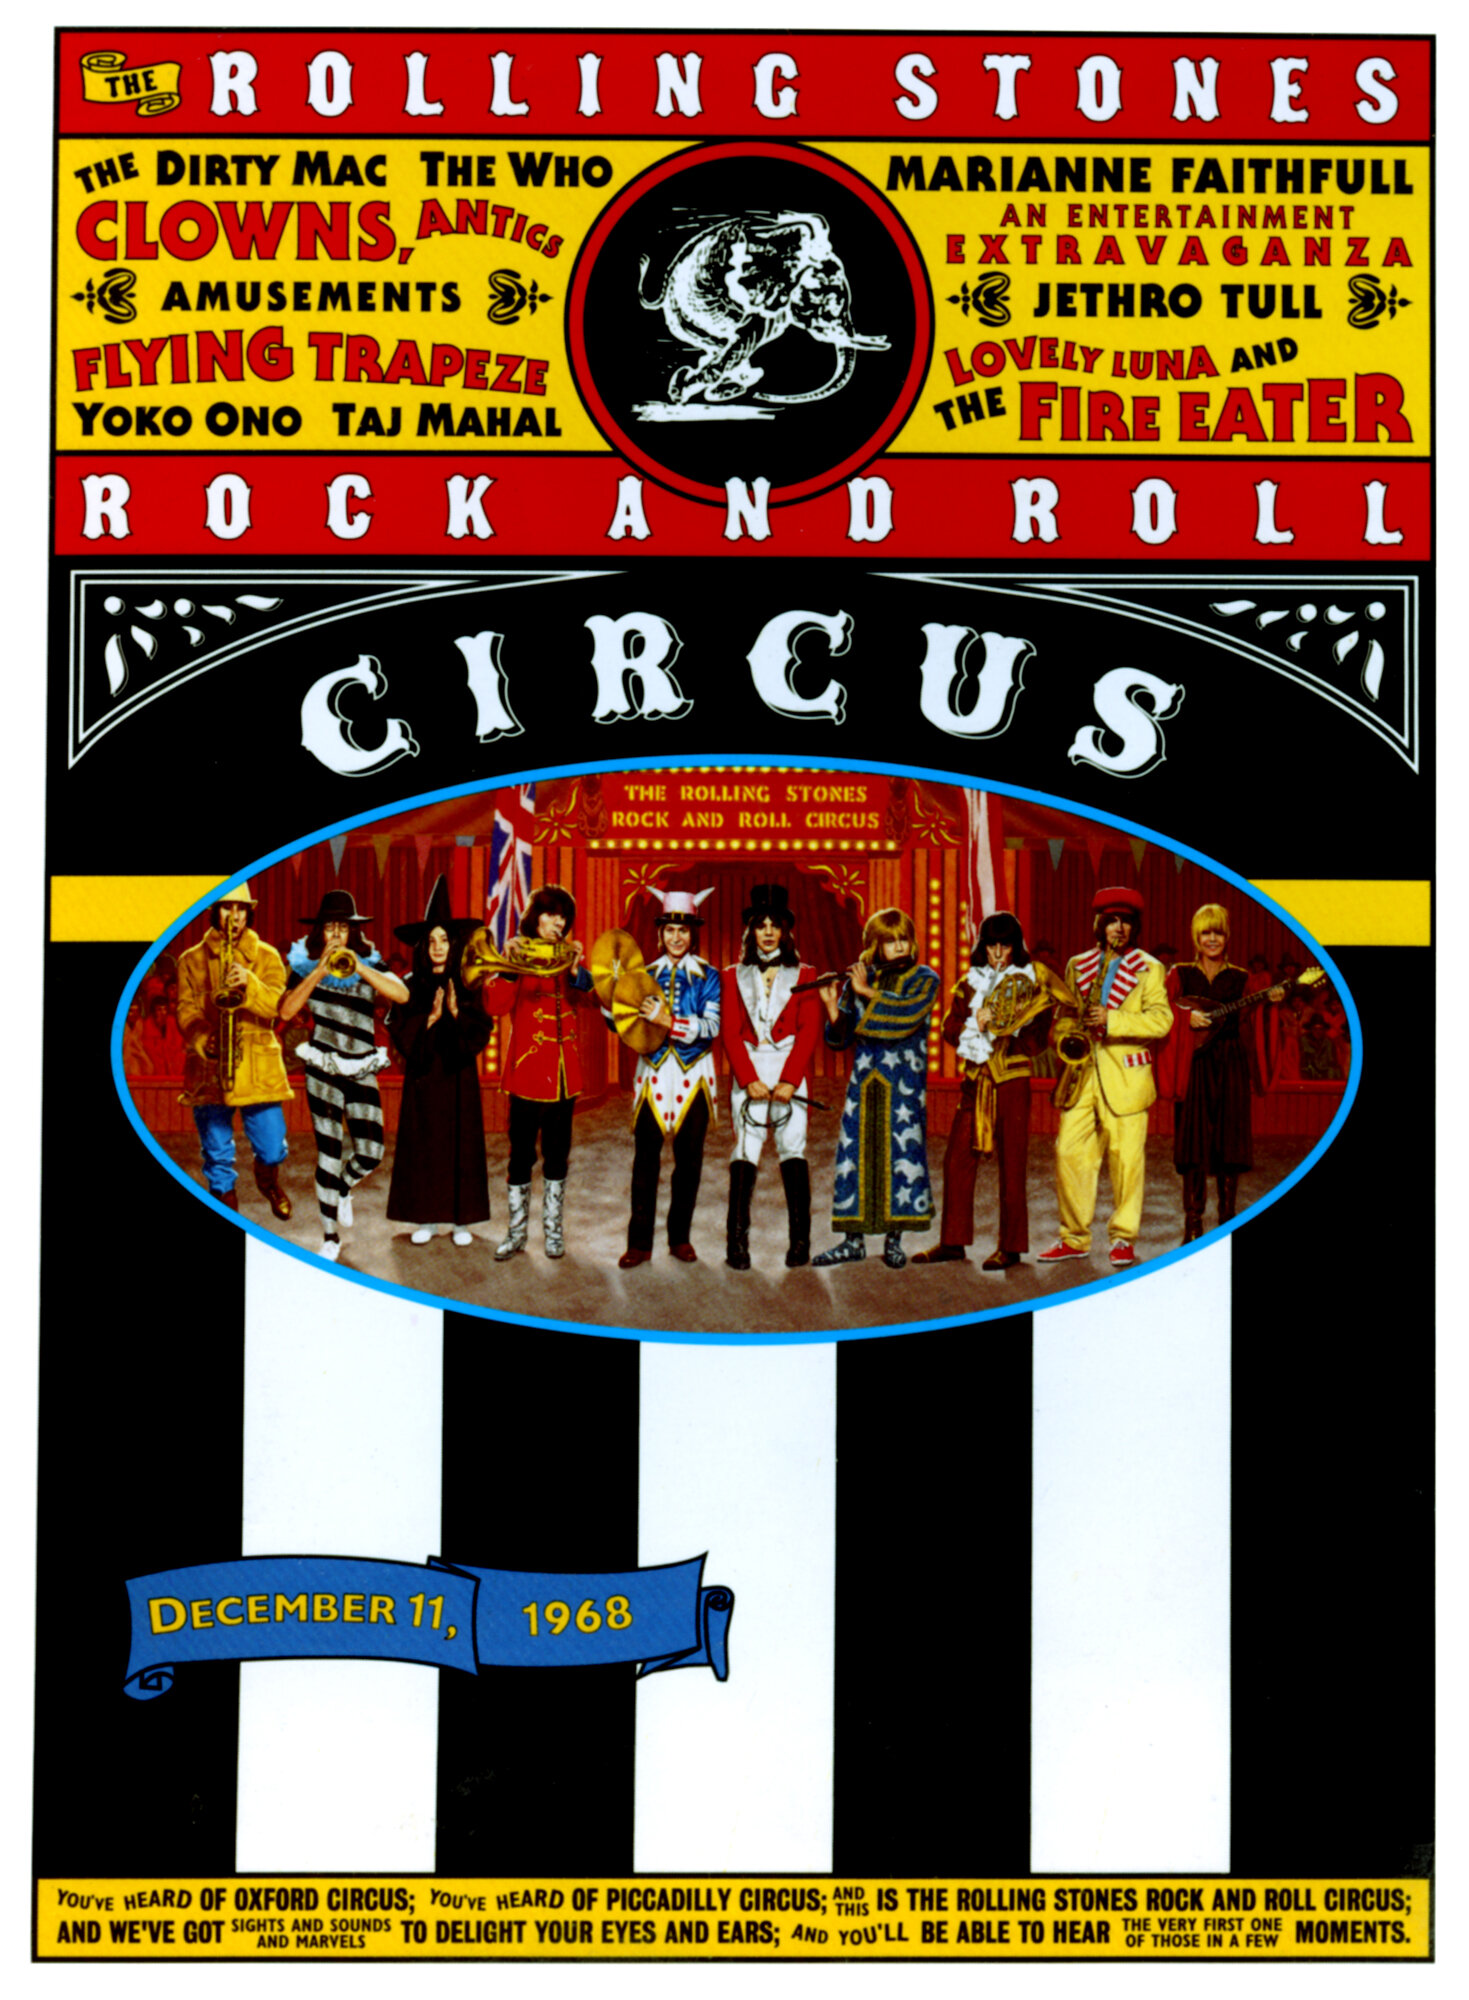 MLH-Rolling Stones R&R Circus DVD Cover 1469 X 2000.jpg